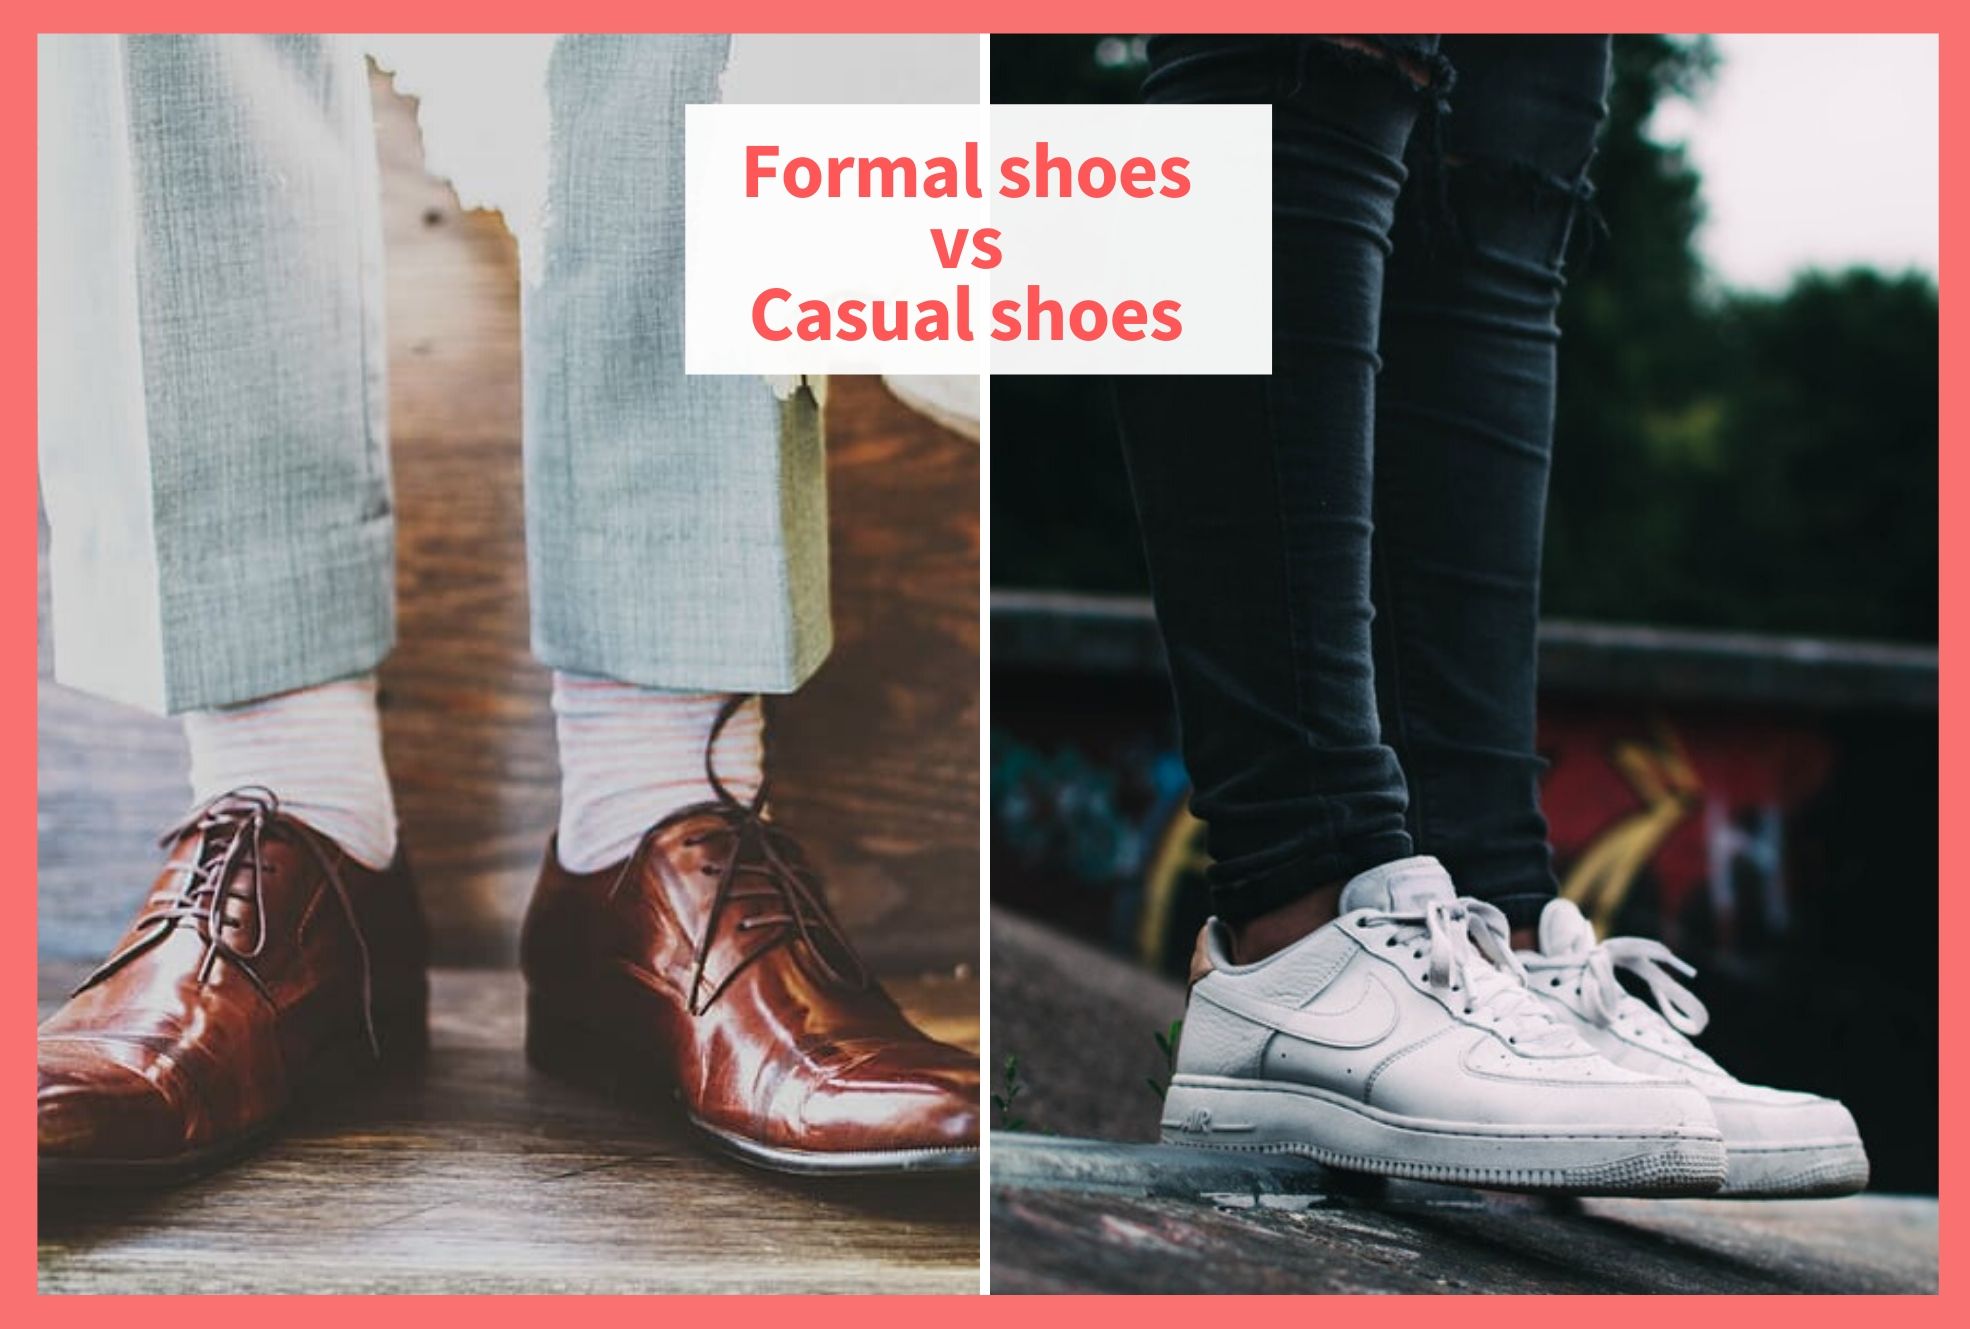 shoes for both casual and formal